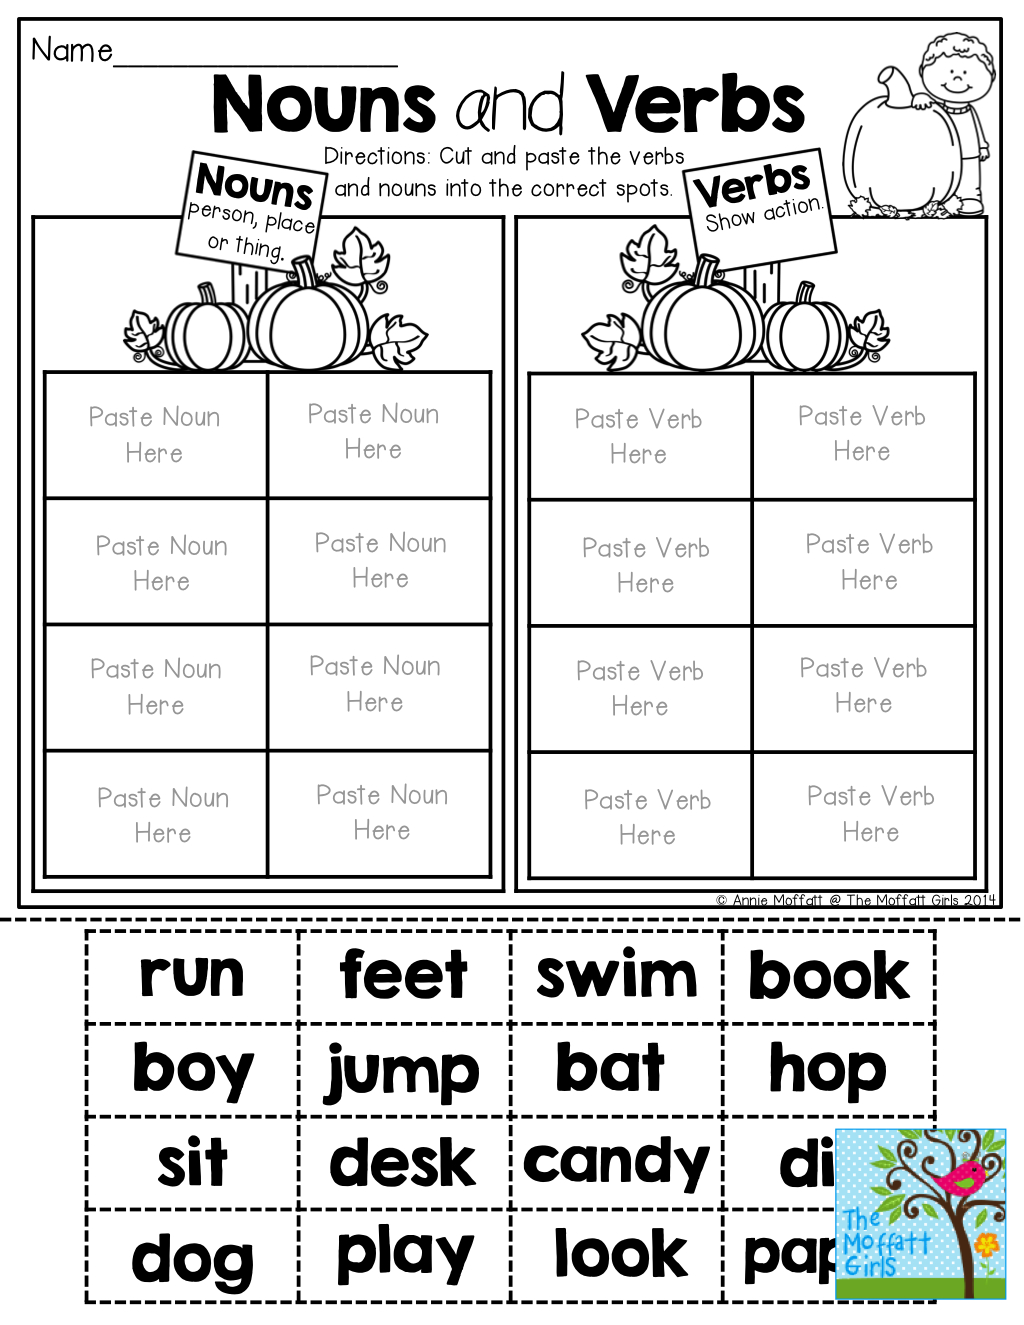 Free Printable Verbs And Nouns Worksheet For Kindergarten Free Printable Verb Worksheets 